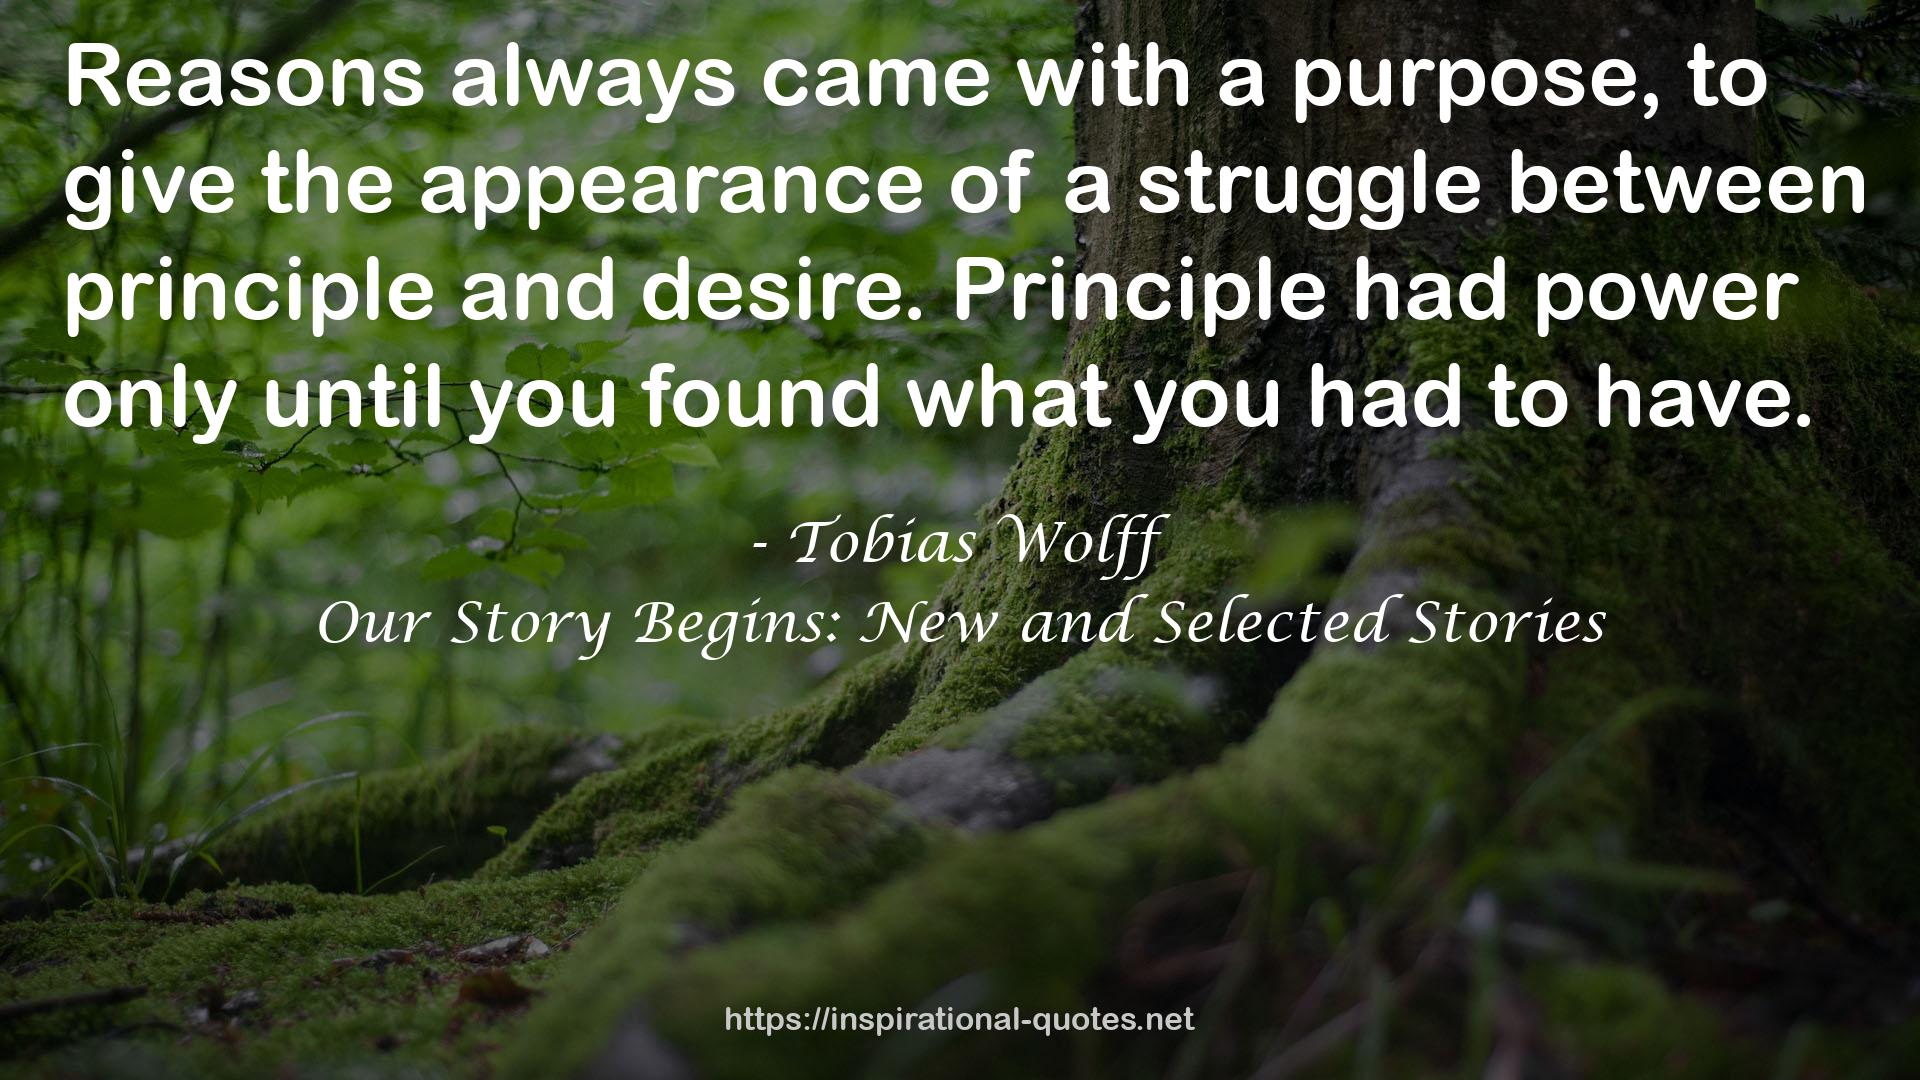 Our Story Begins: New and Selected Stories QUOTES